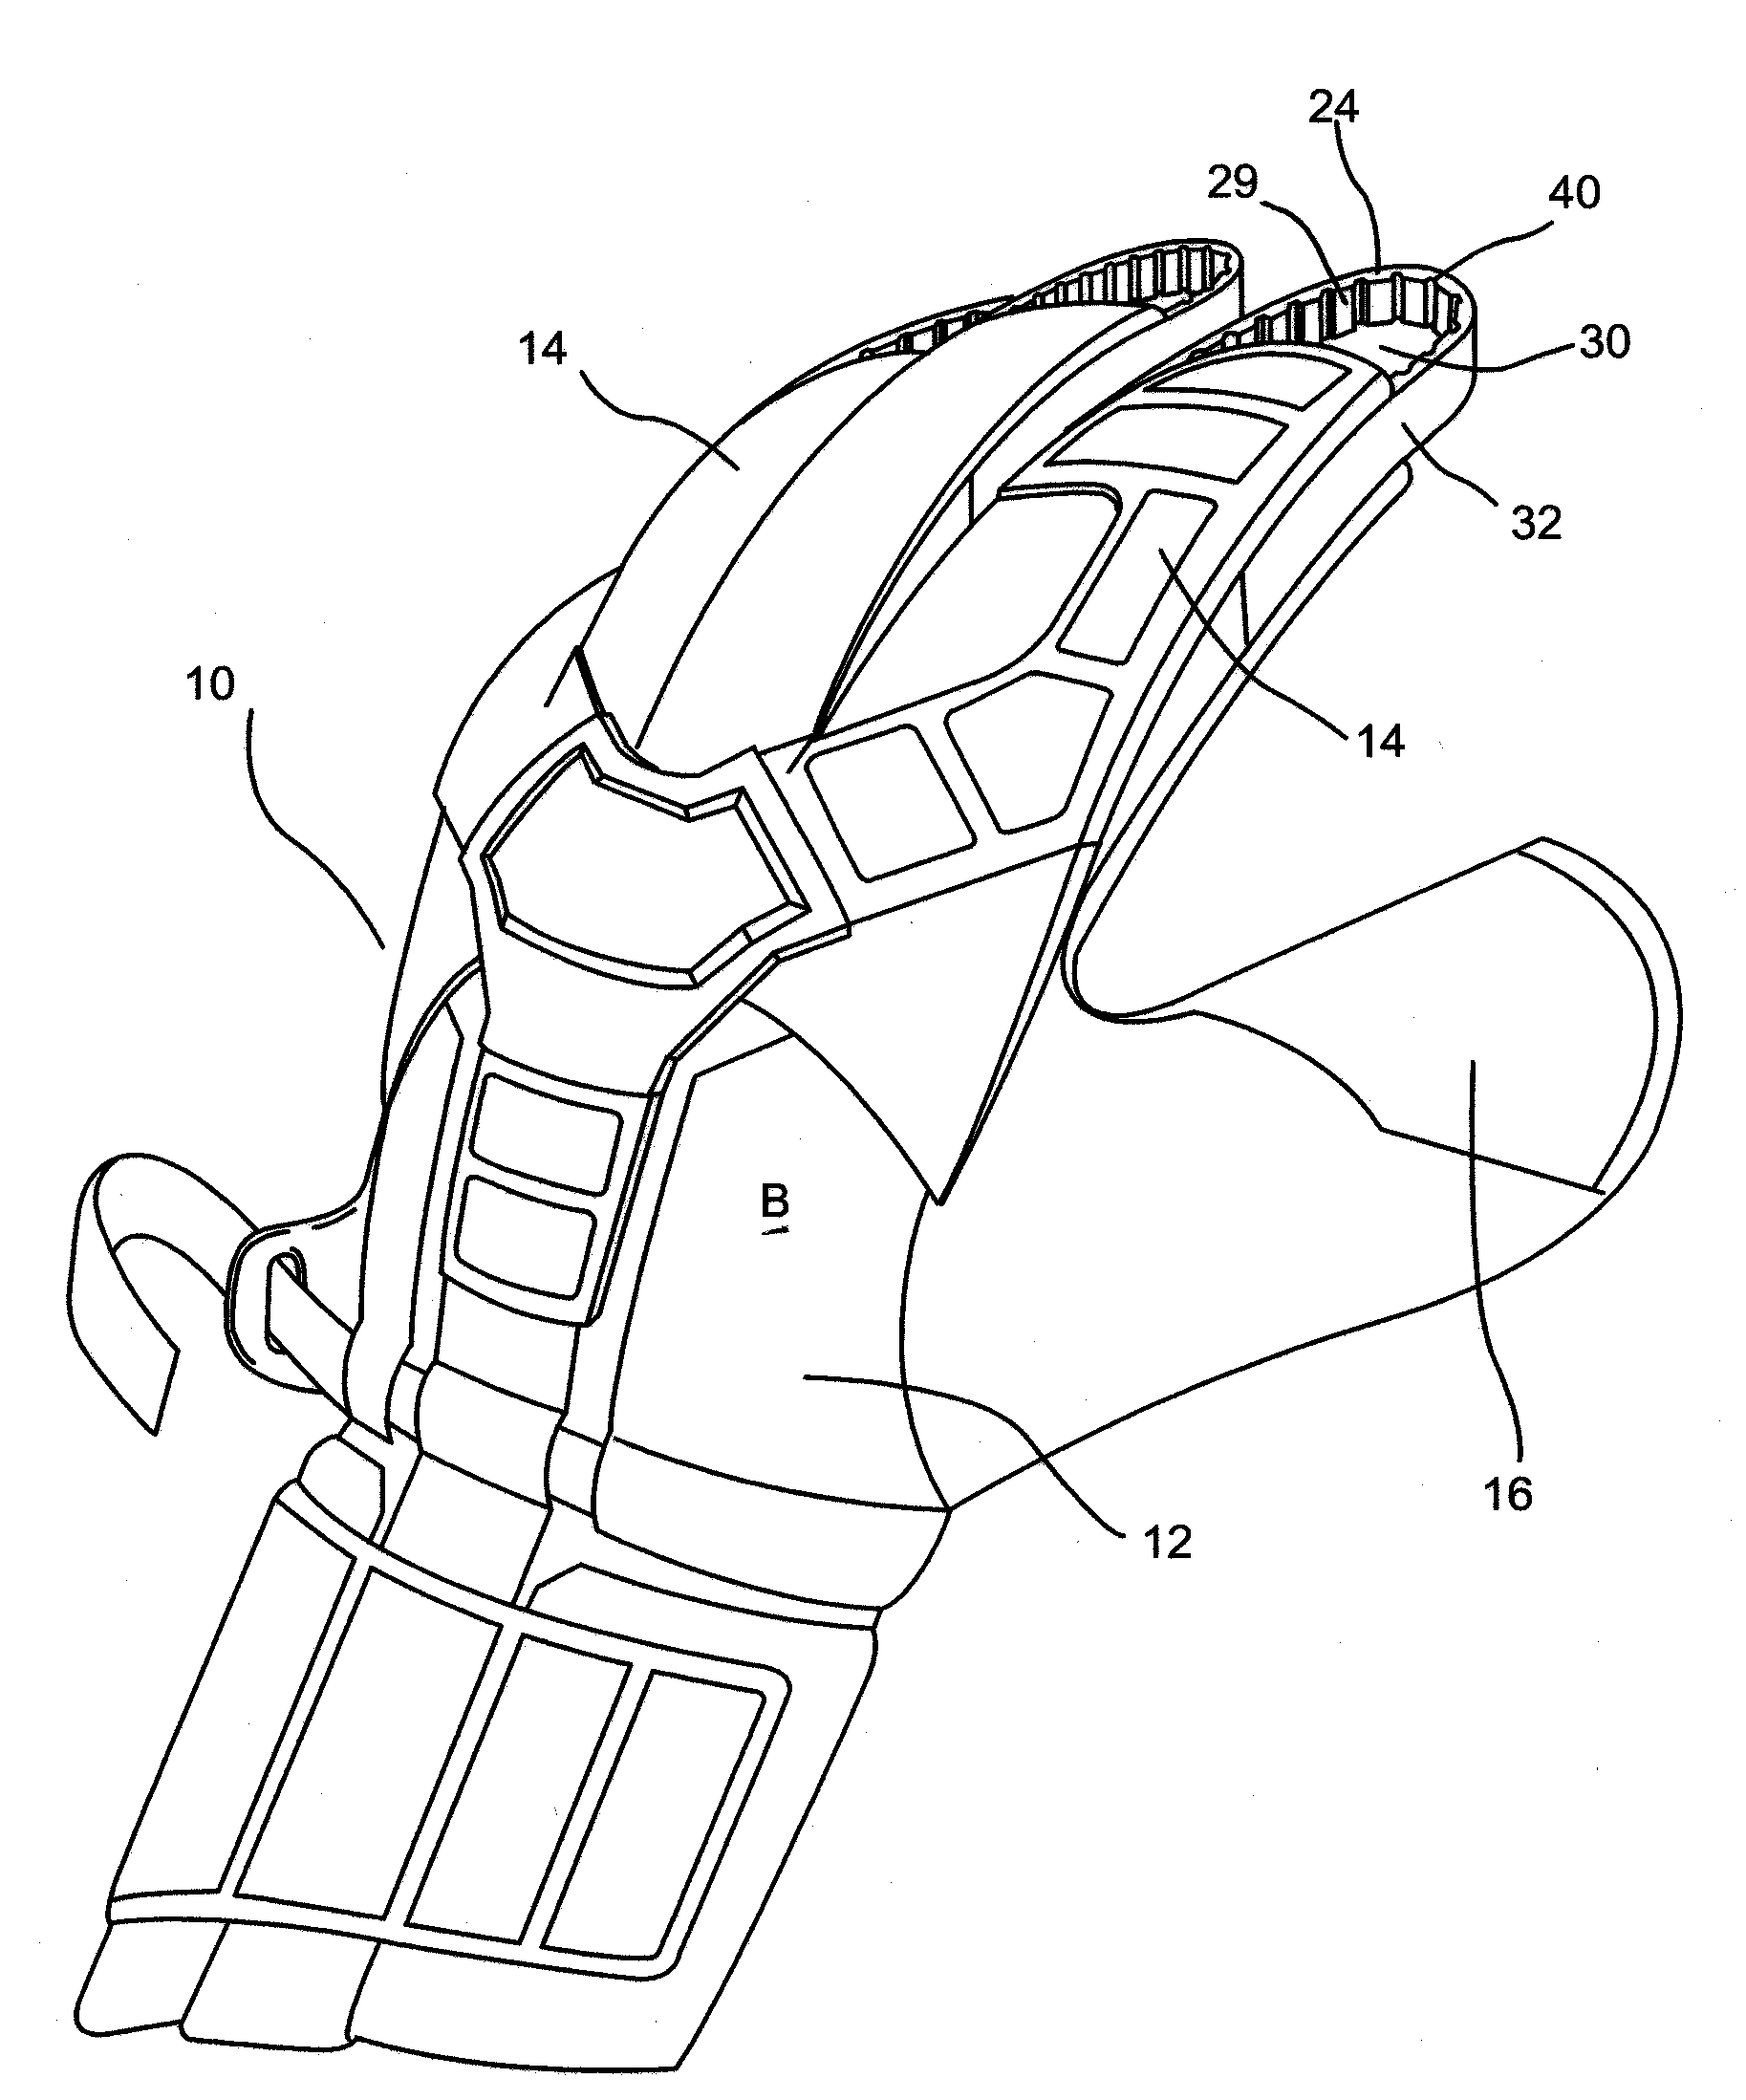 Goalkeeper's glove with protective fingertip extension